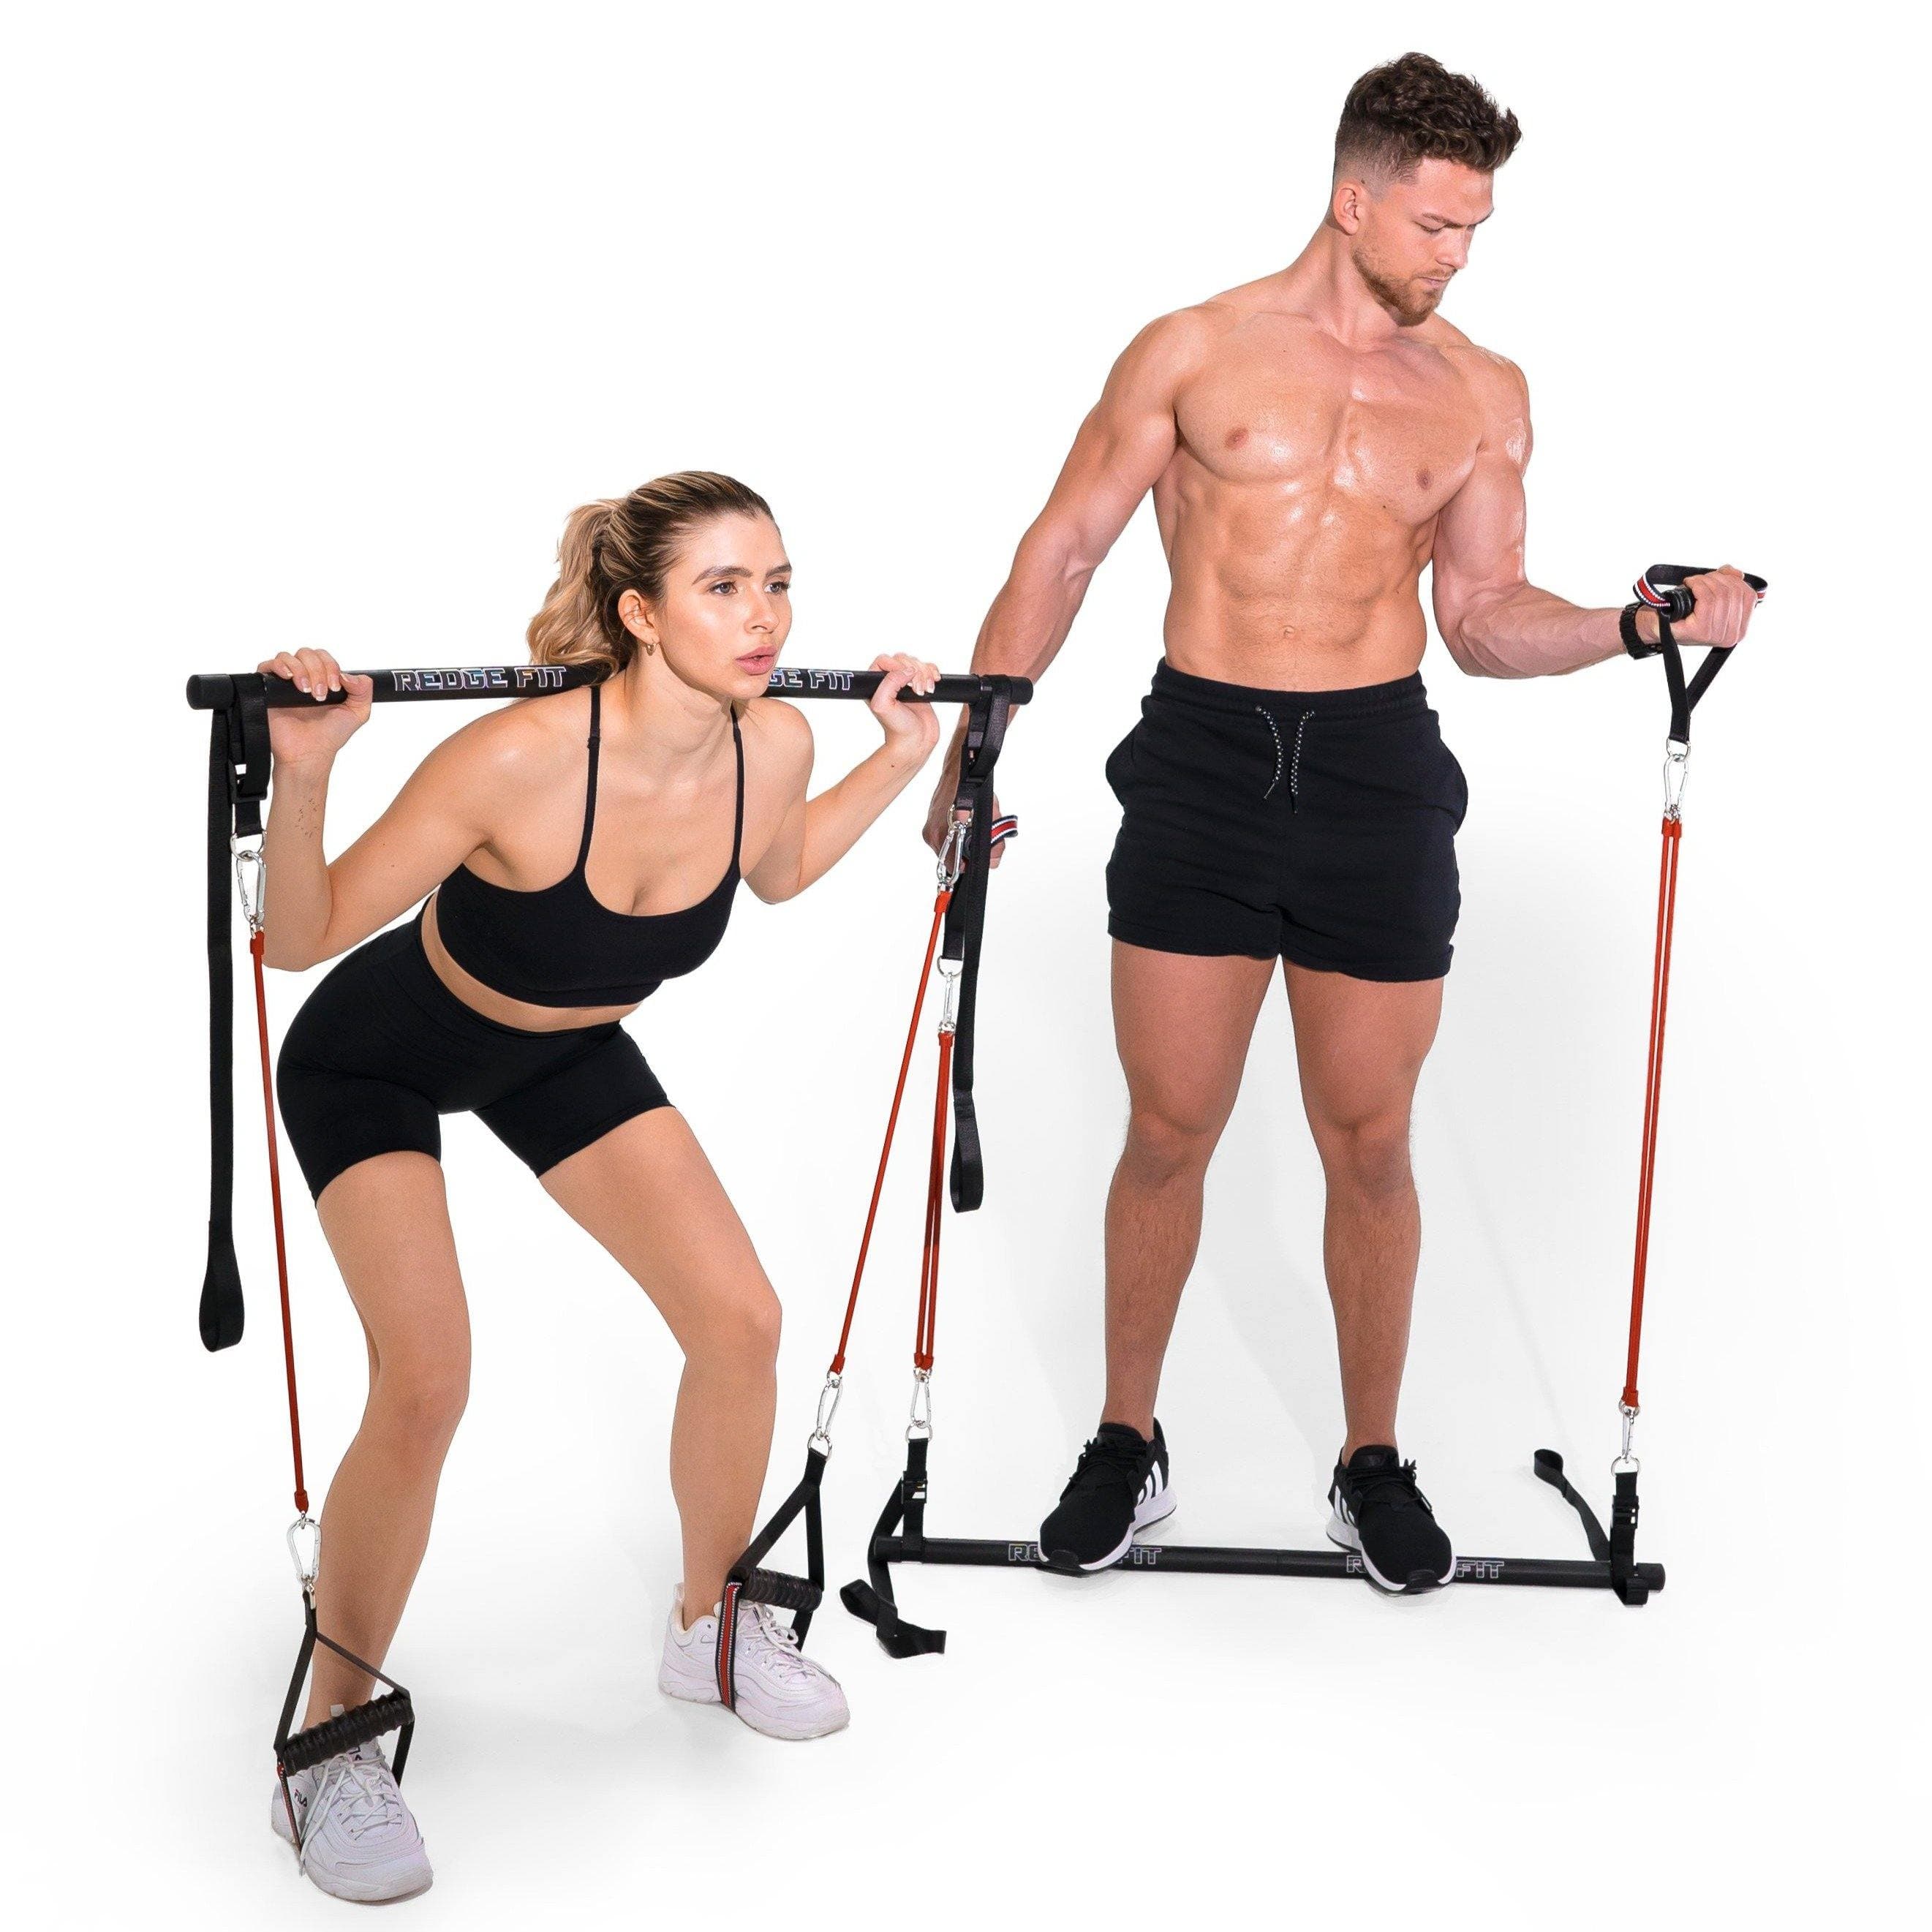 Man and Woman modeling the Redge Fit Core Focus Starter Pack Portable Gym Machine Available at https://www.getredge.com/products/core-focus-all-in-one-pack-1 